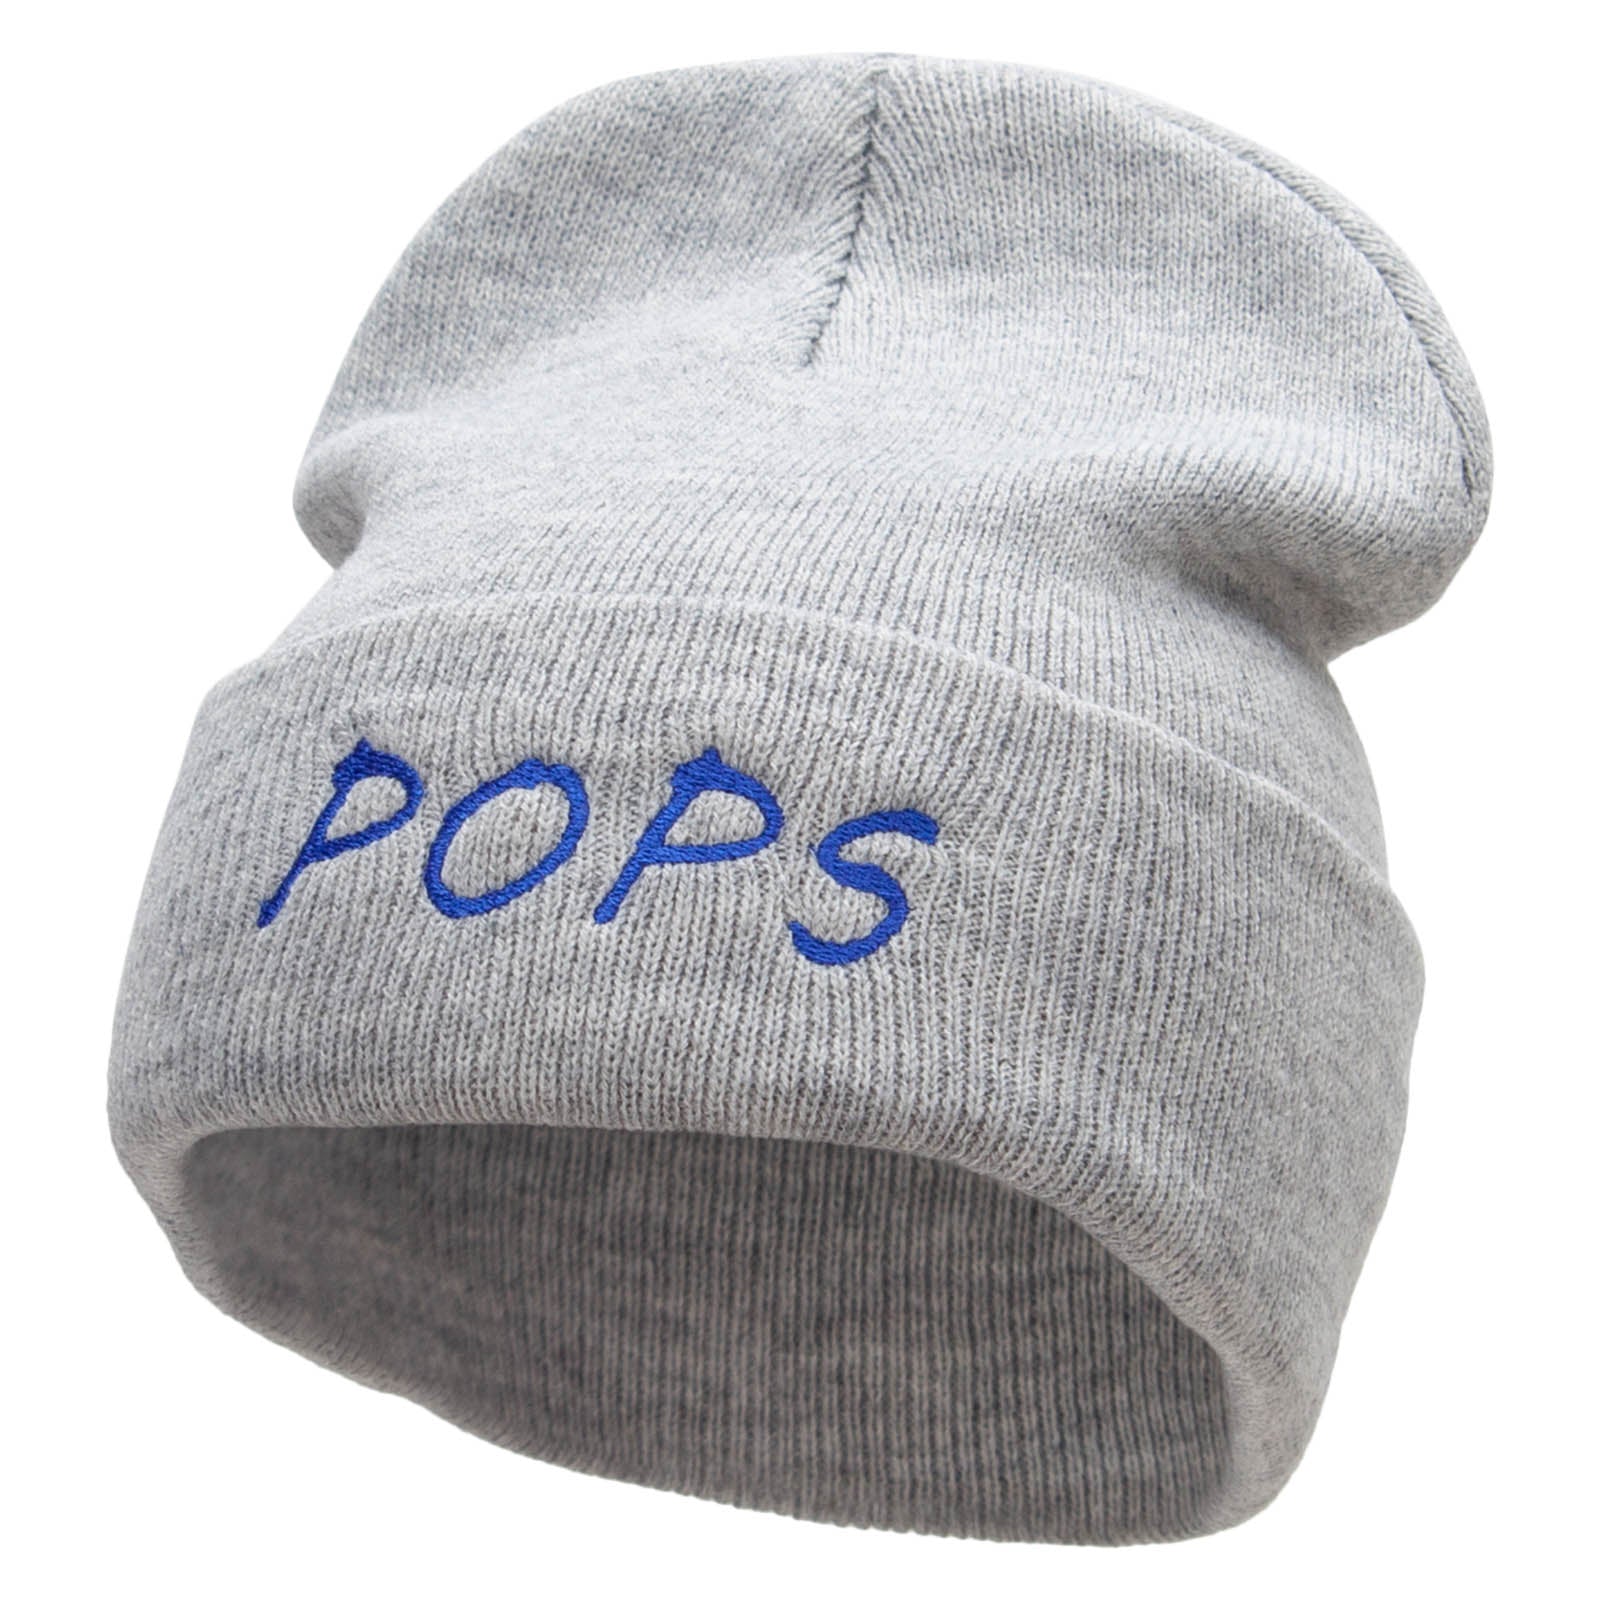 Pops Embroidered 12 Inch Long Knitted Beanie - Heather Grey OSFM